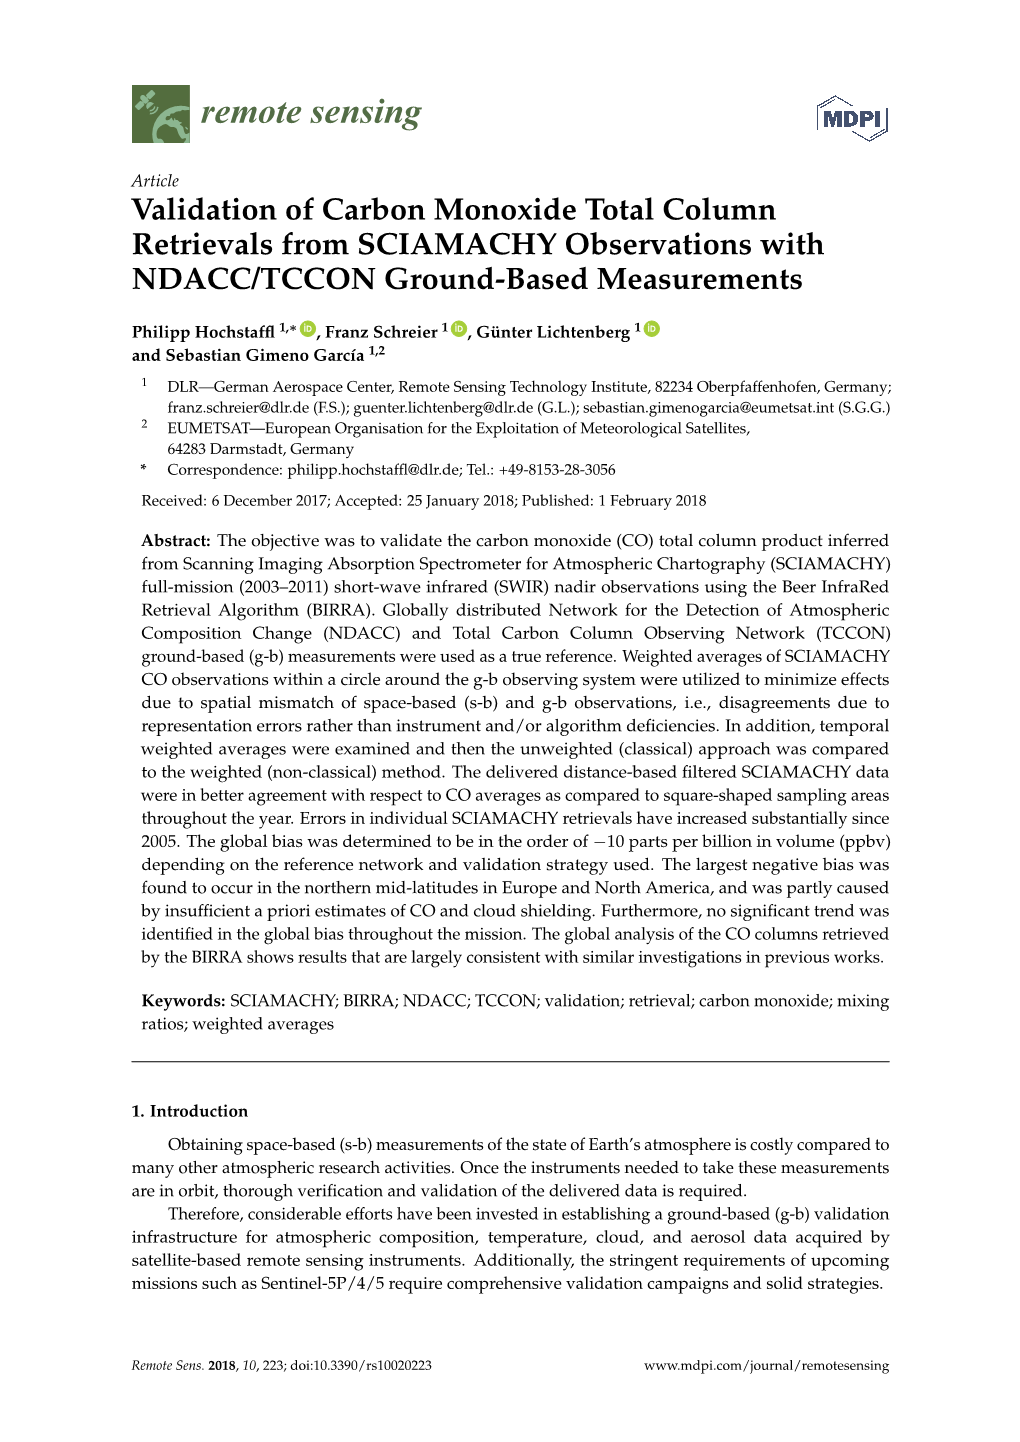 Validation of Carbon Monoxide Total Column Retrievals from SCIAMACHY Observations with NDACC/TCCON Ground-Based Measurements